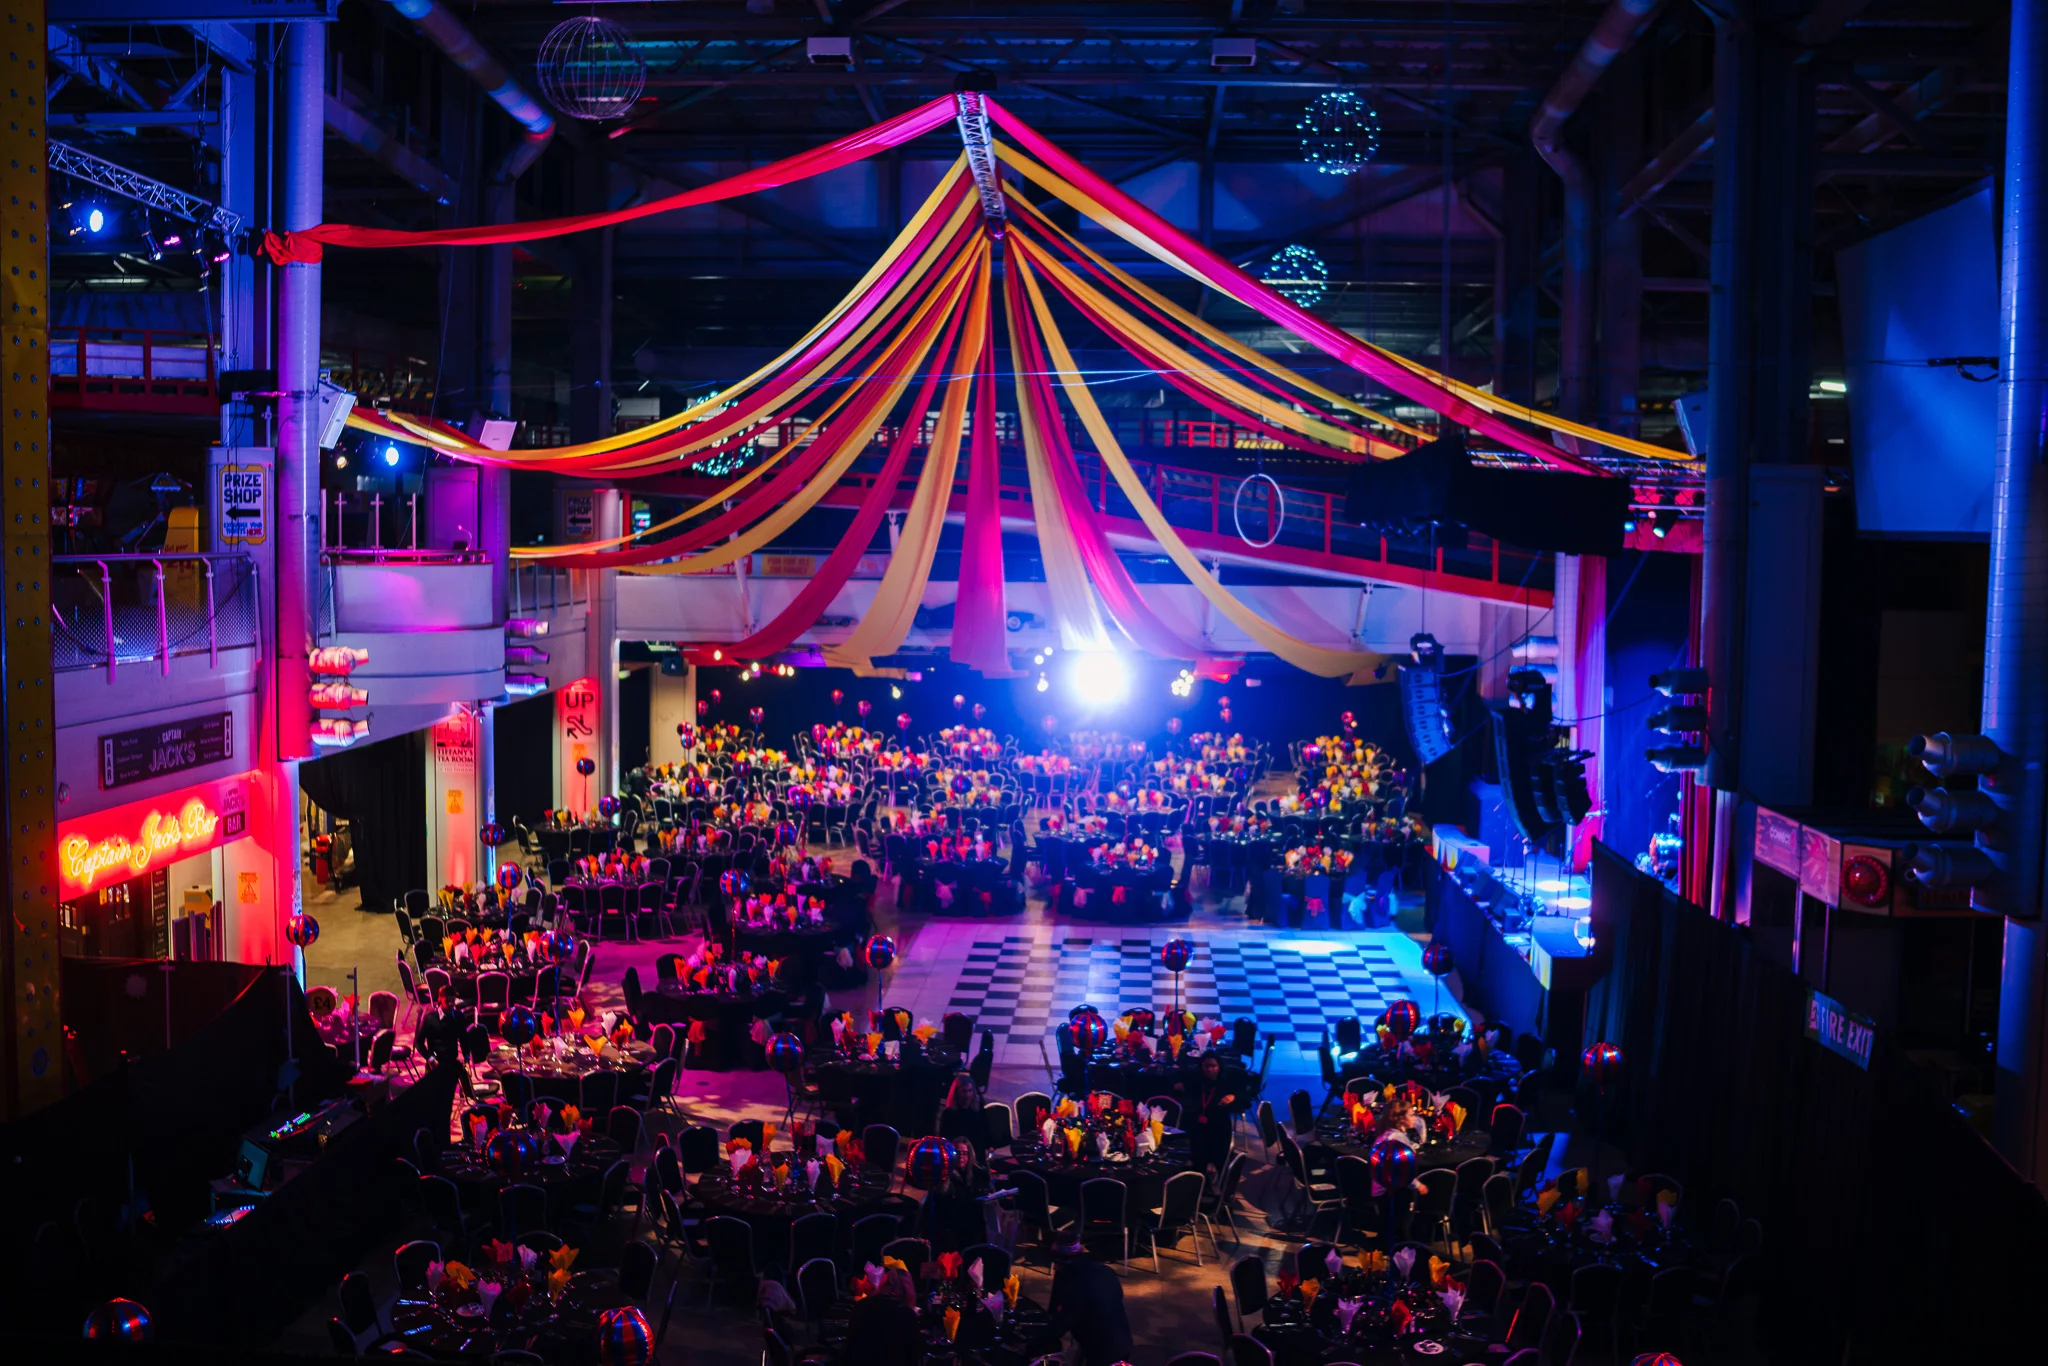 The Grand Piers main event hall with large circular tables and decorations with a event in full swing